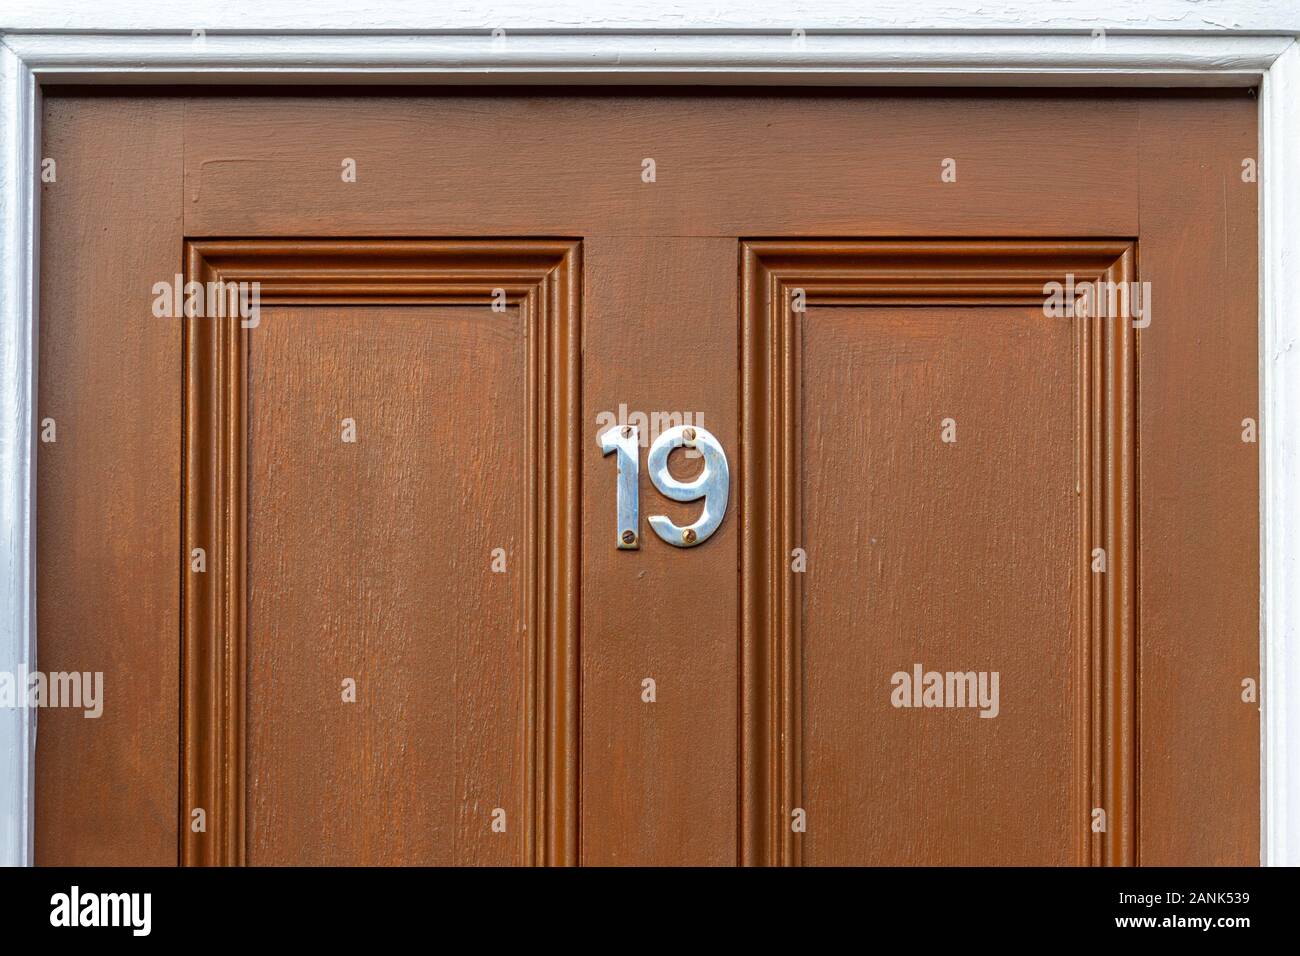 House number 19 Stock Photo